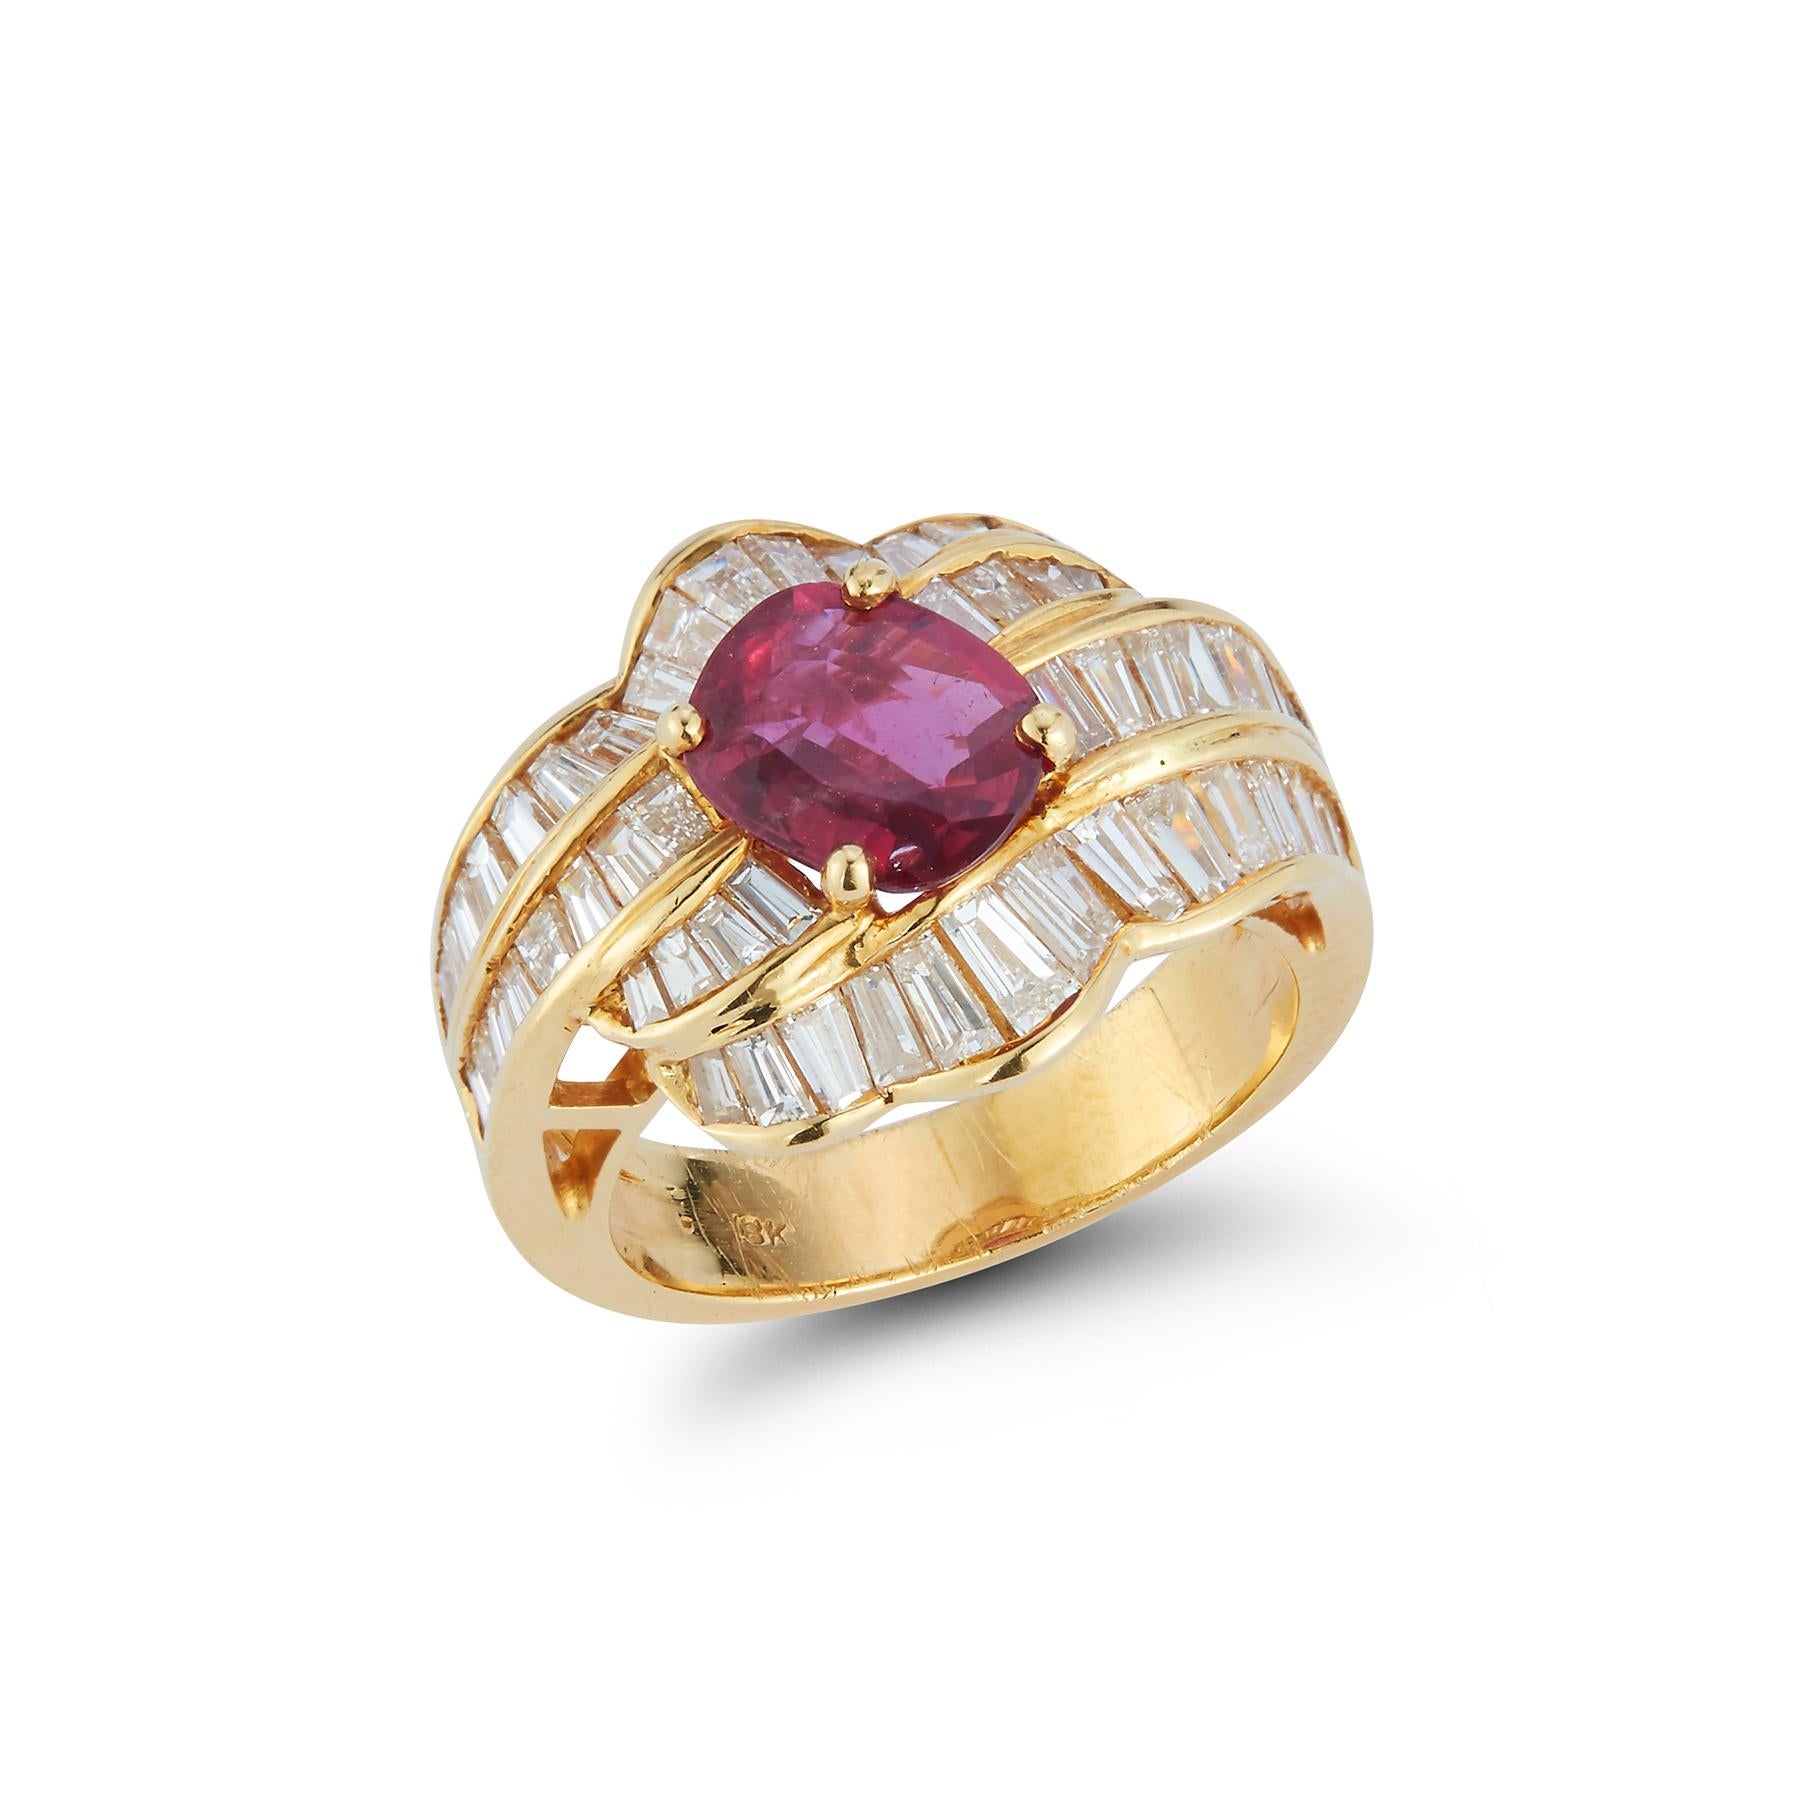 Oval Cut Ruby & Baguette Cut Diamonds Ring

AGL Certified 

18K Gold Ring with Center Oval Ruby approximately 1.87 cts with 54 Surrounding Tapered Baguette Cut Diamonds approximately 2.27 cts

Ring Size 6.25

Resizable Free of Charge